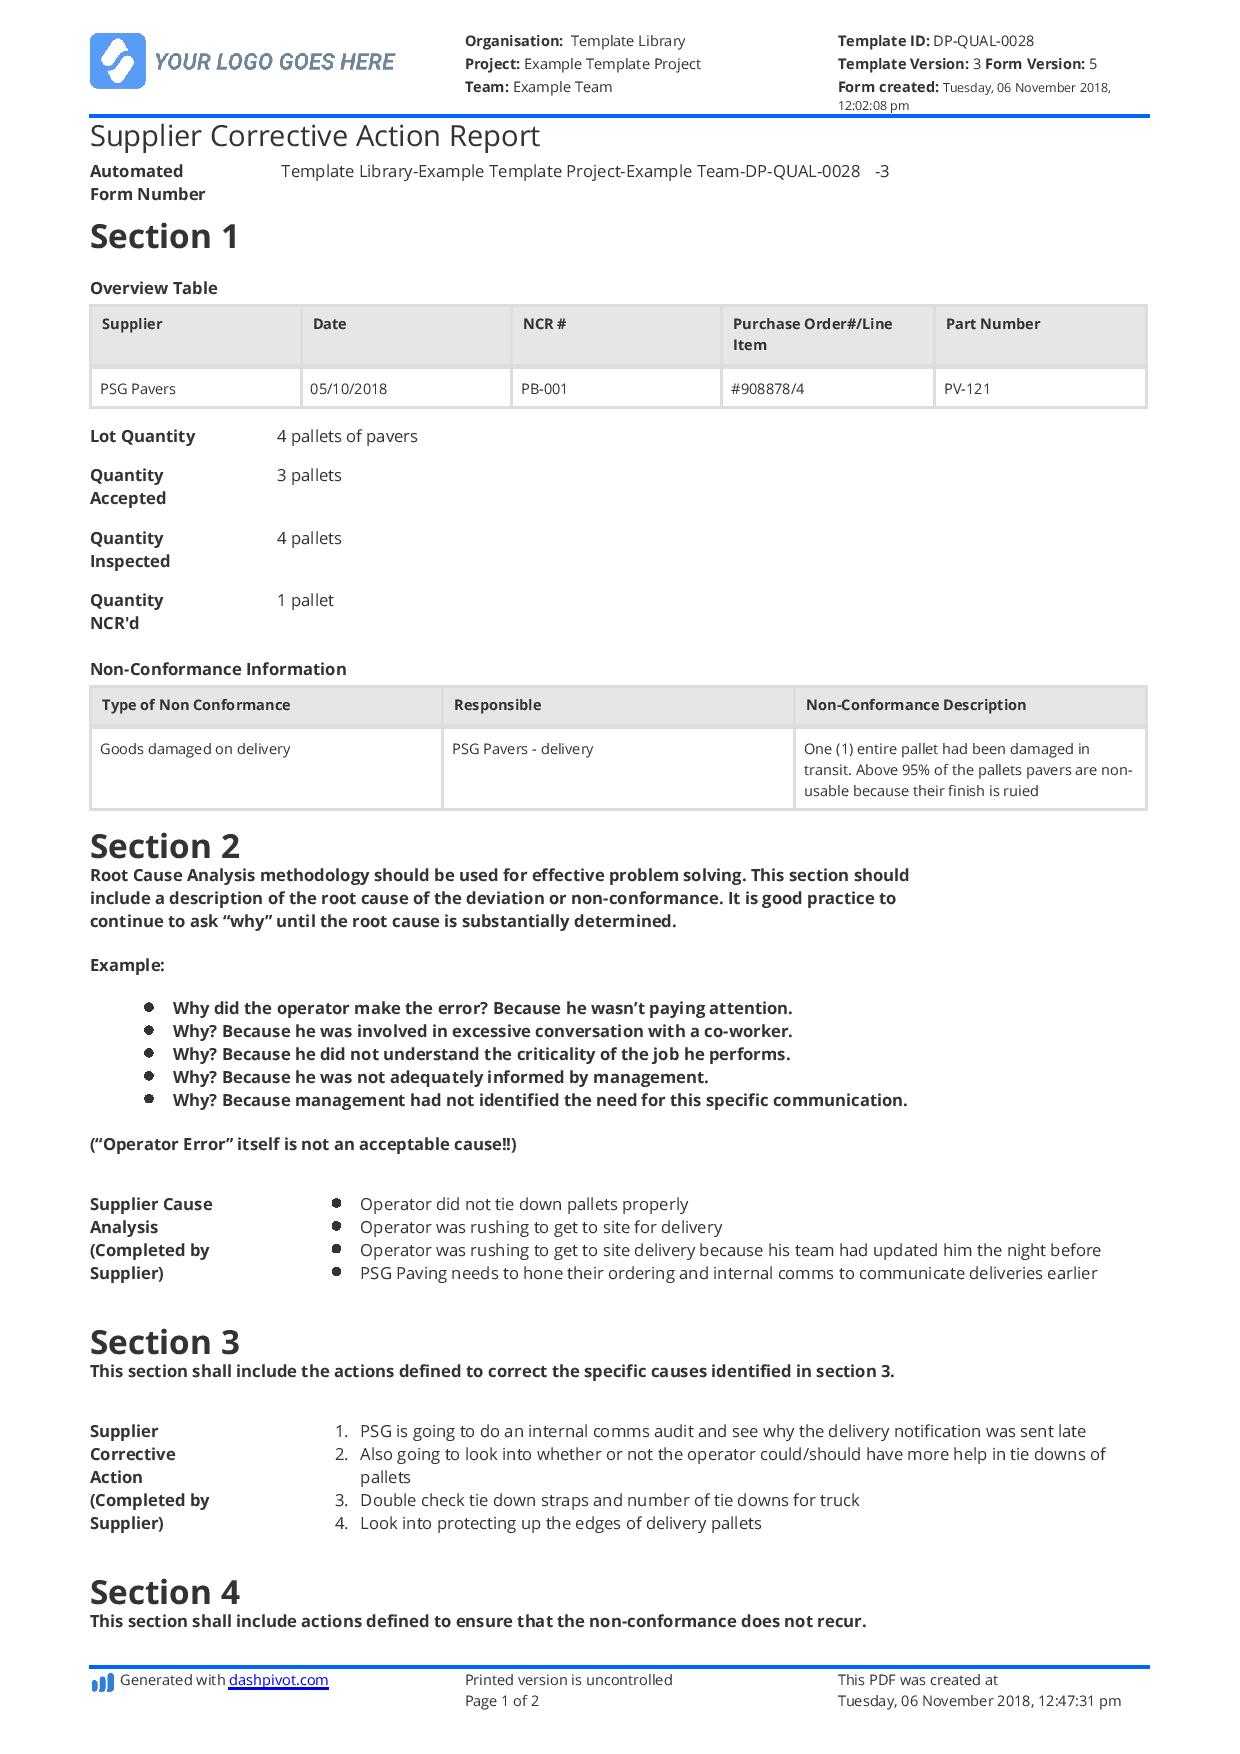 Supplier Corrective Action Report Template: Improve Your For Check Out Report Template